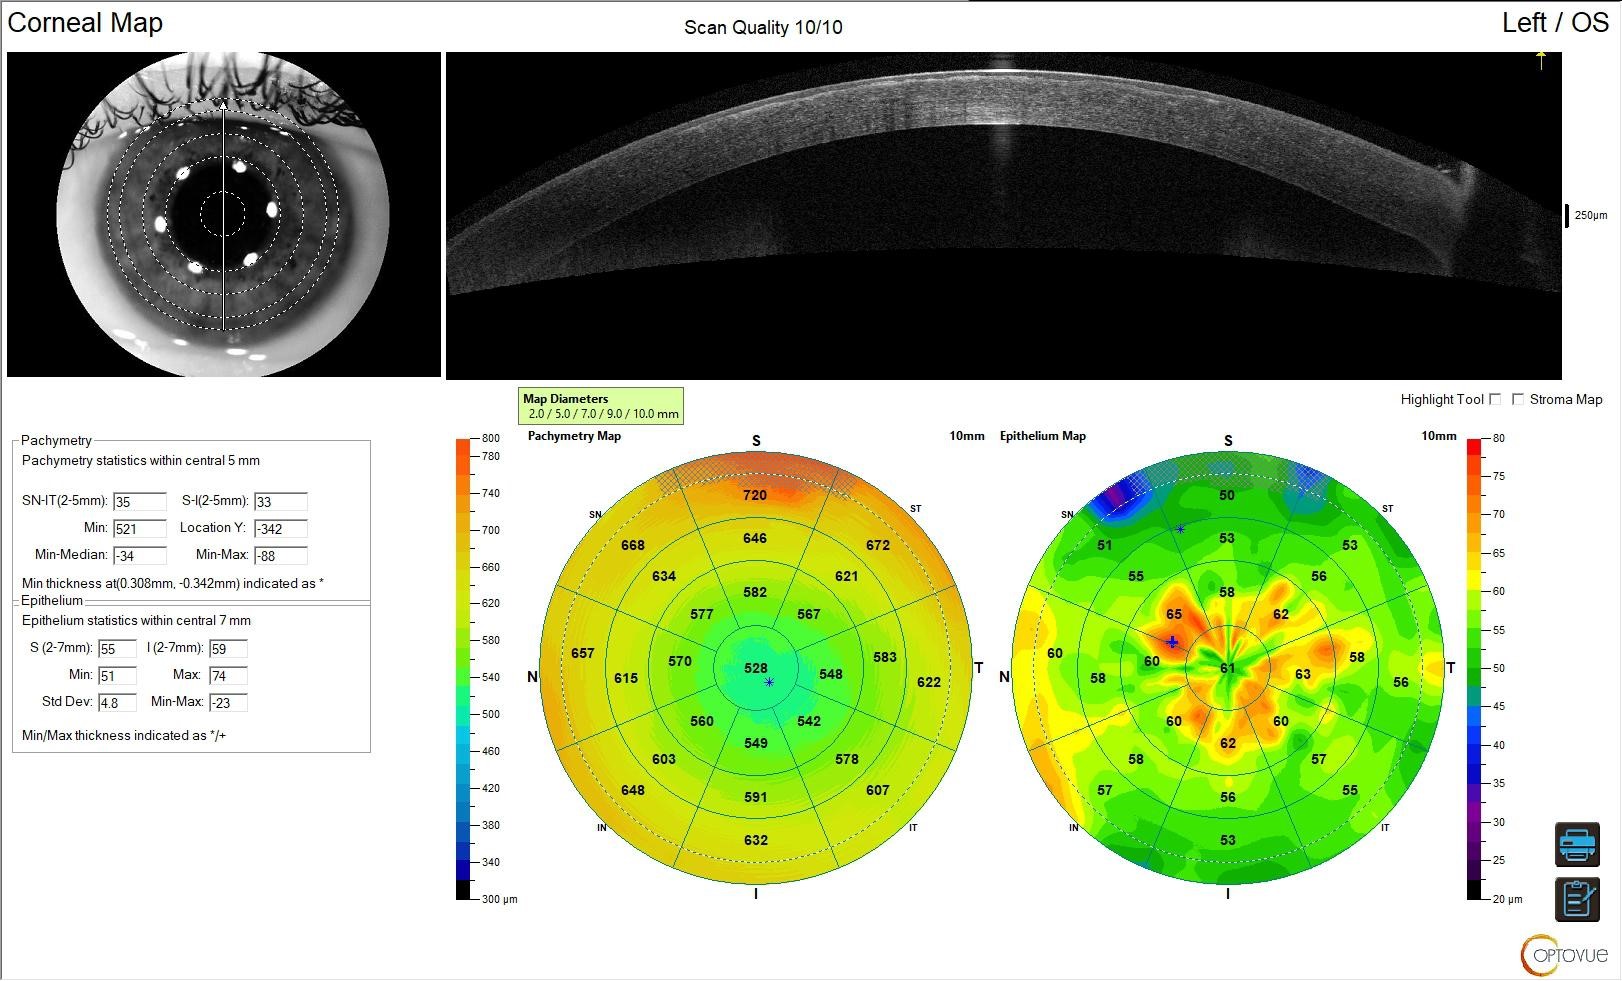 fig. 2 Optovue Solix OCT (Optical Coherence Tomography) appearance, with epithelial mapping. This clearly shows the irregular aspect of the subepithelial stroma and the compensation of the epithelium.